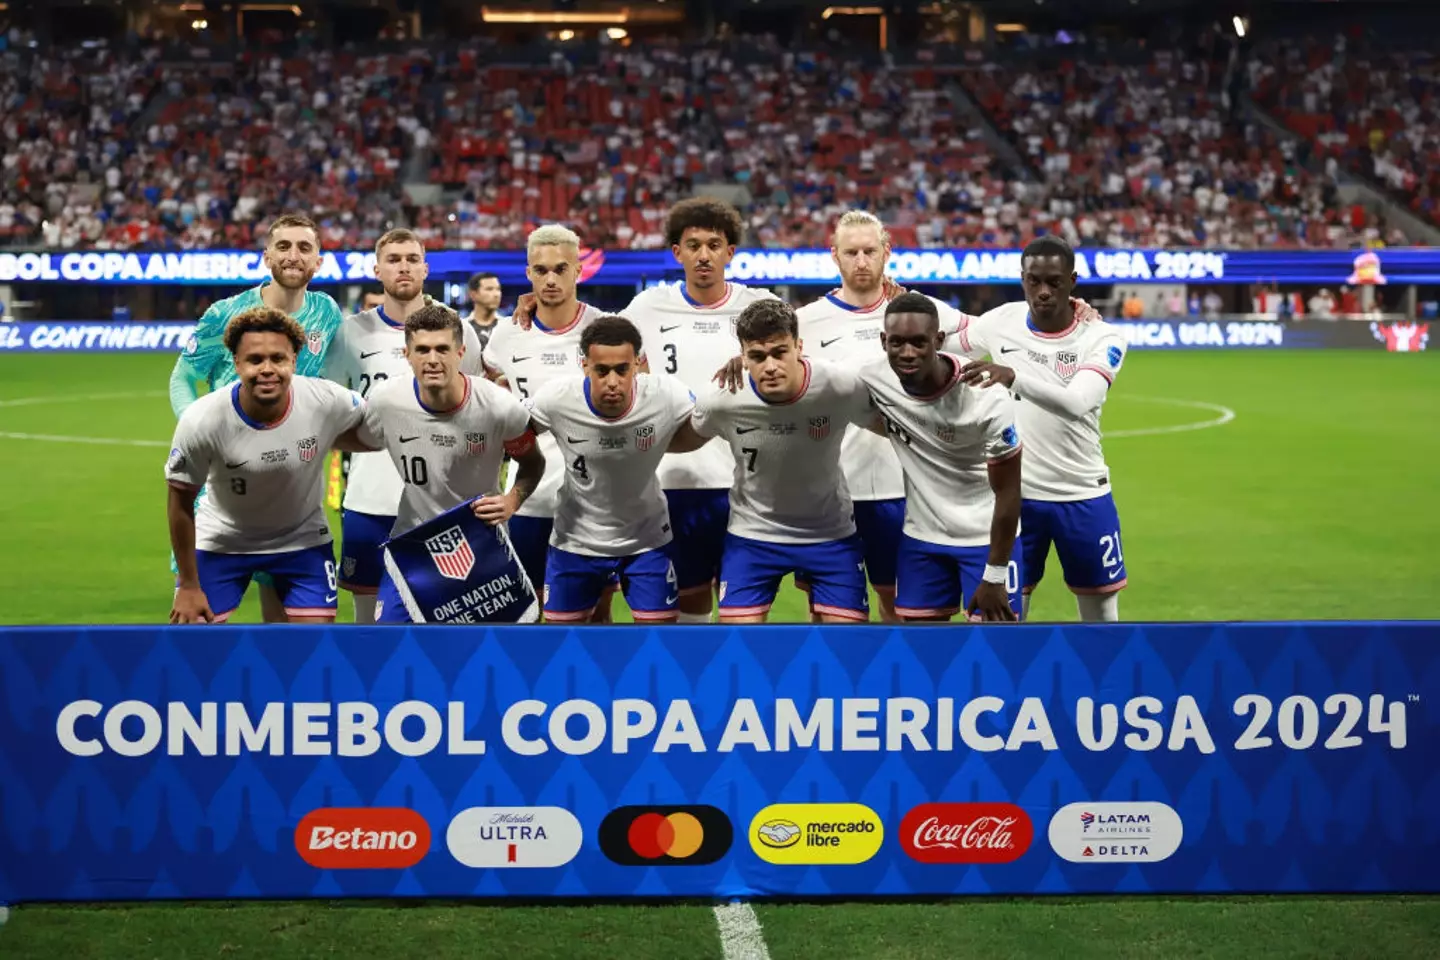 The USA national team are currently competing in the 2024 Copa America which is being hosted across the country. (Image: Getty)